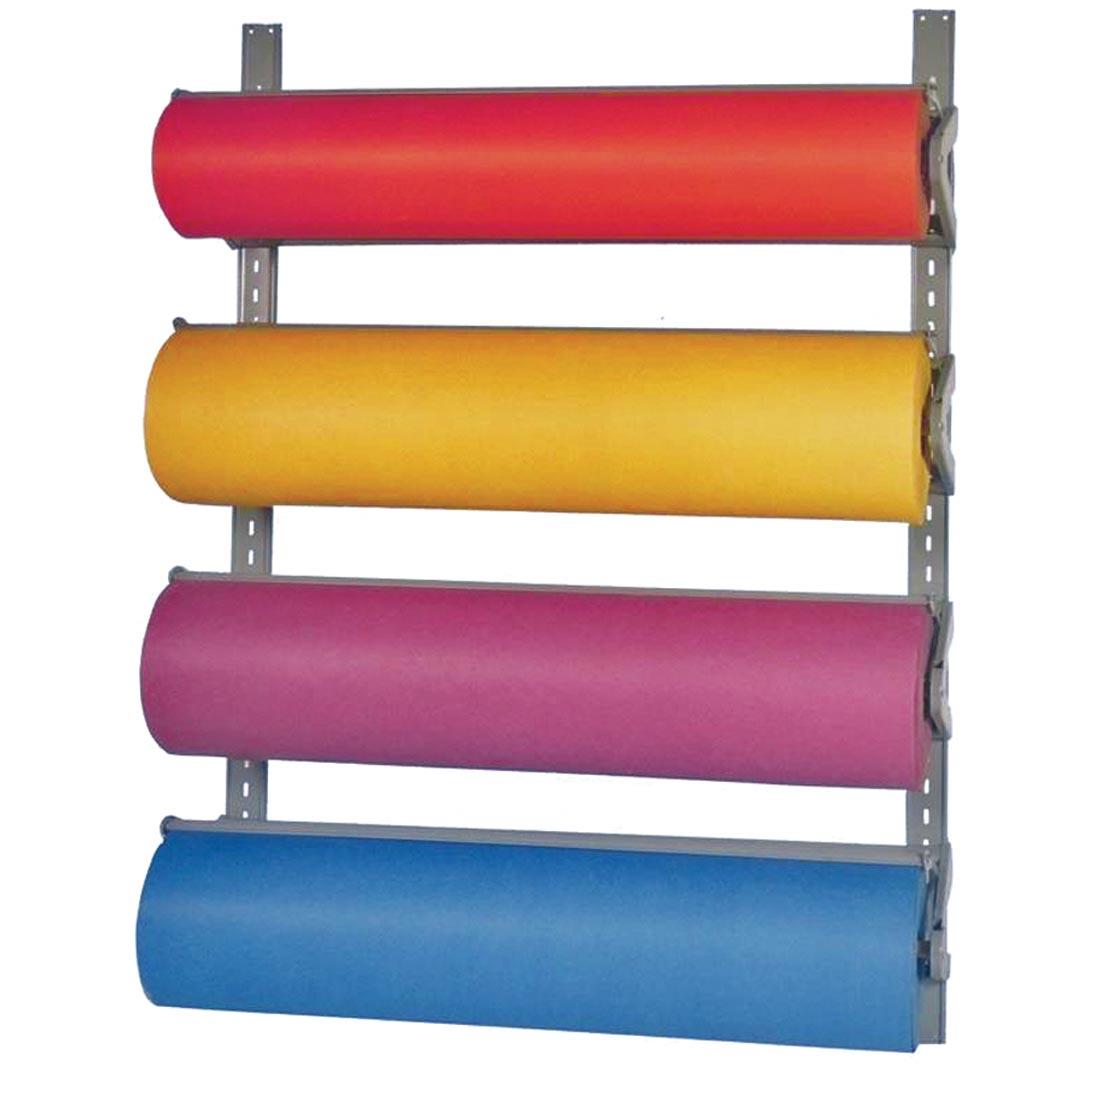 4-Roll Paper Wall Rack Shown Loaded With Paper Rolls